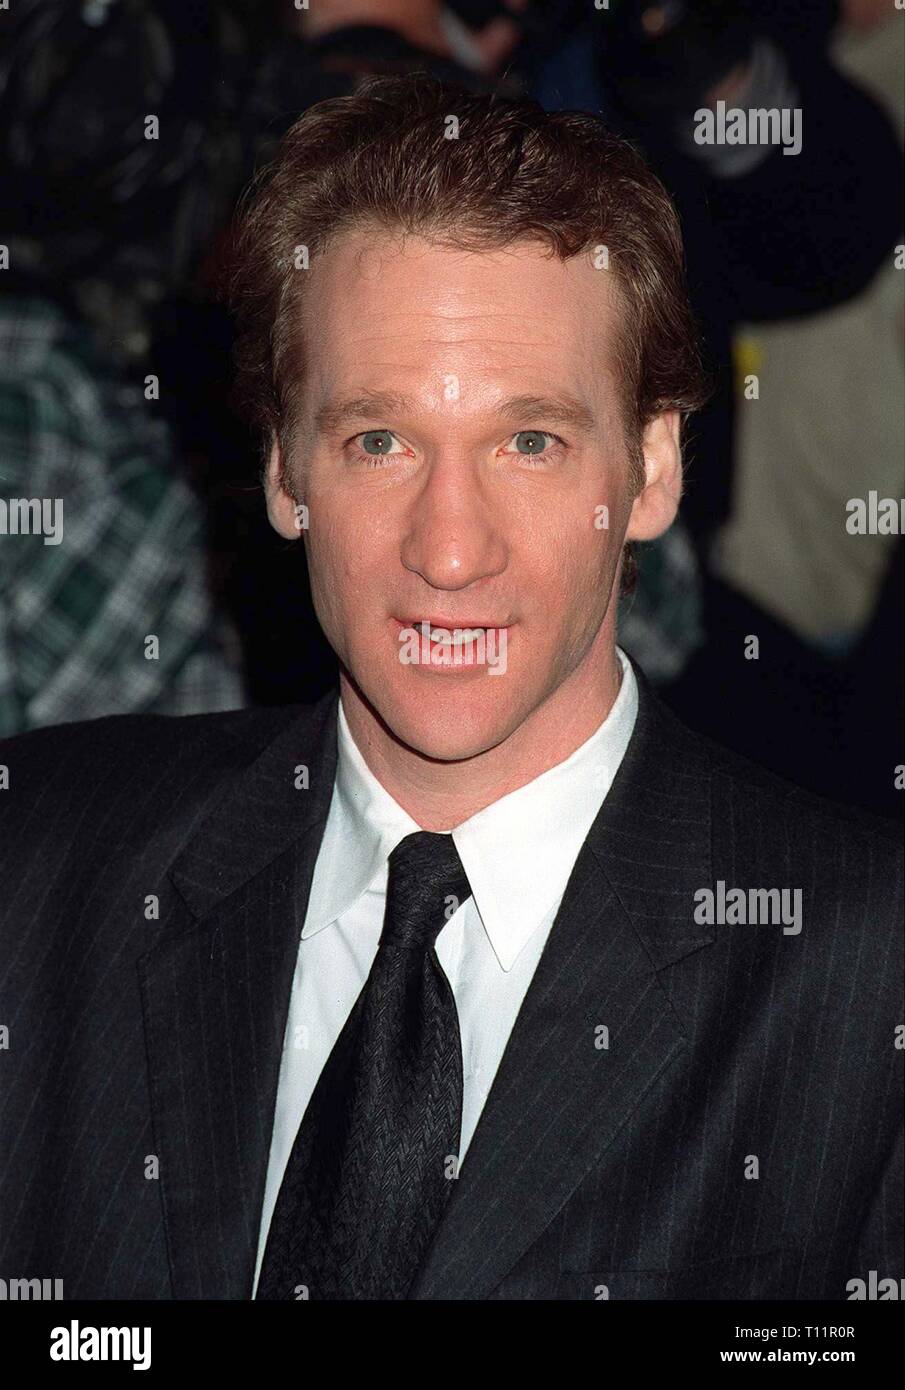 LOS ANGELES, CA. February 10, 1997: Politically Incorrect star Bill Maher at the American  Comedy Awards. Stock Photo